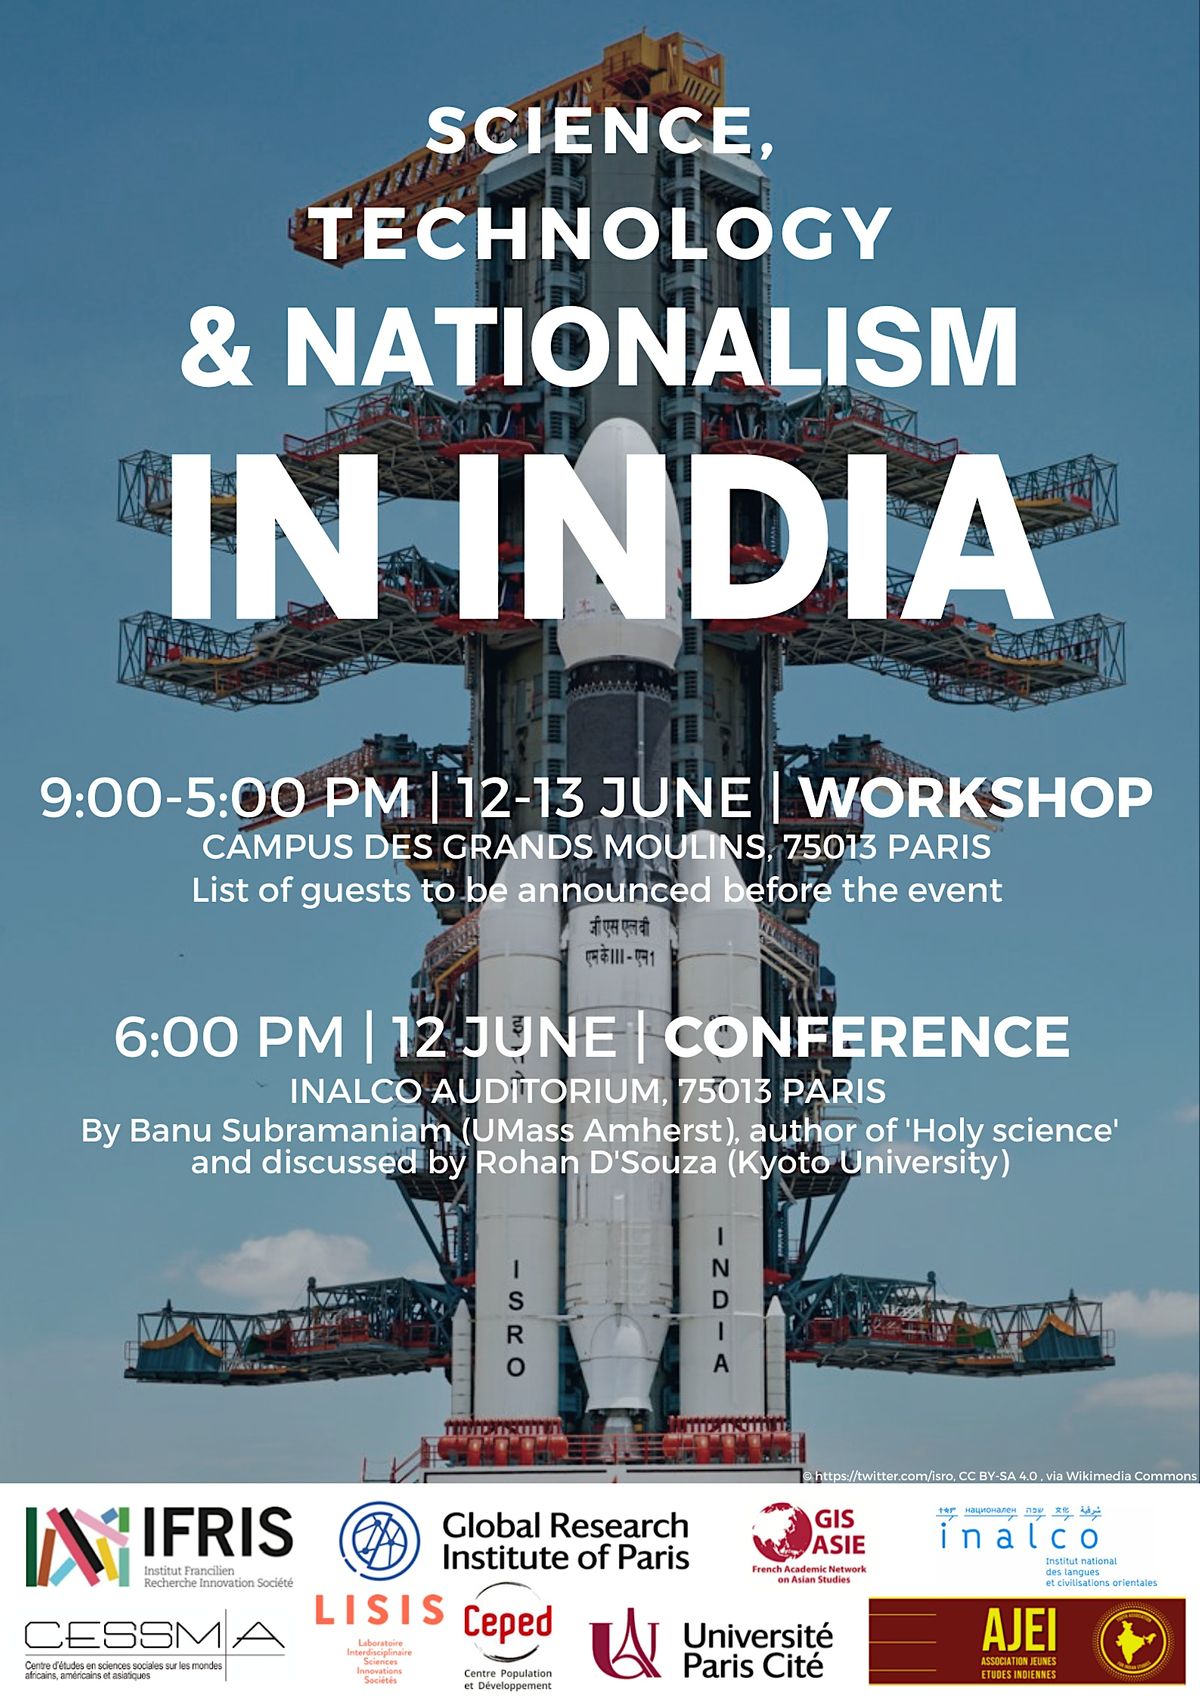 Science, Technology & Nationalism in India